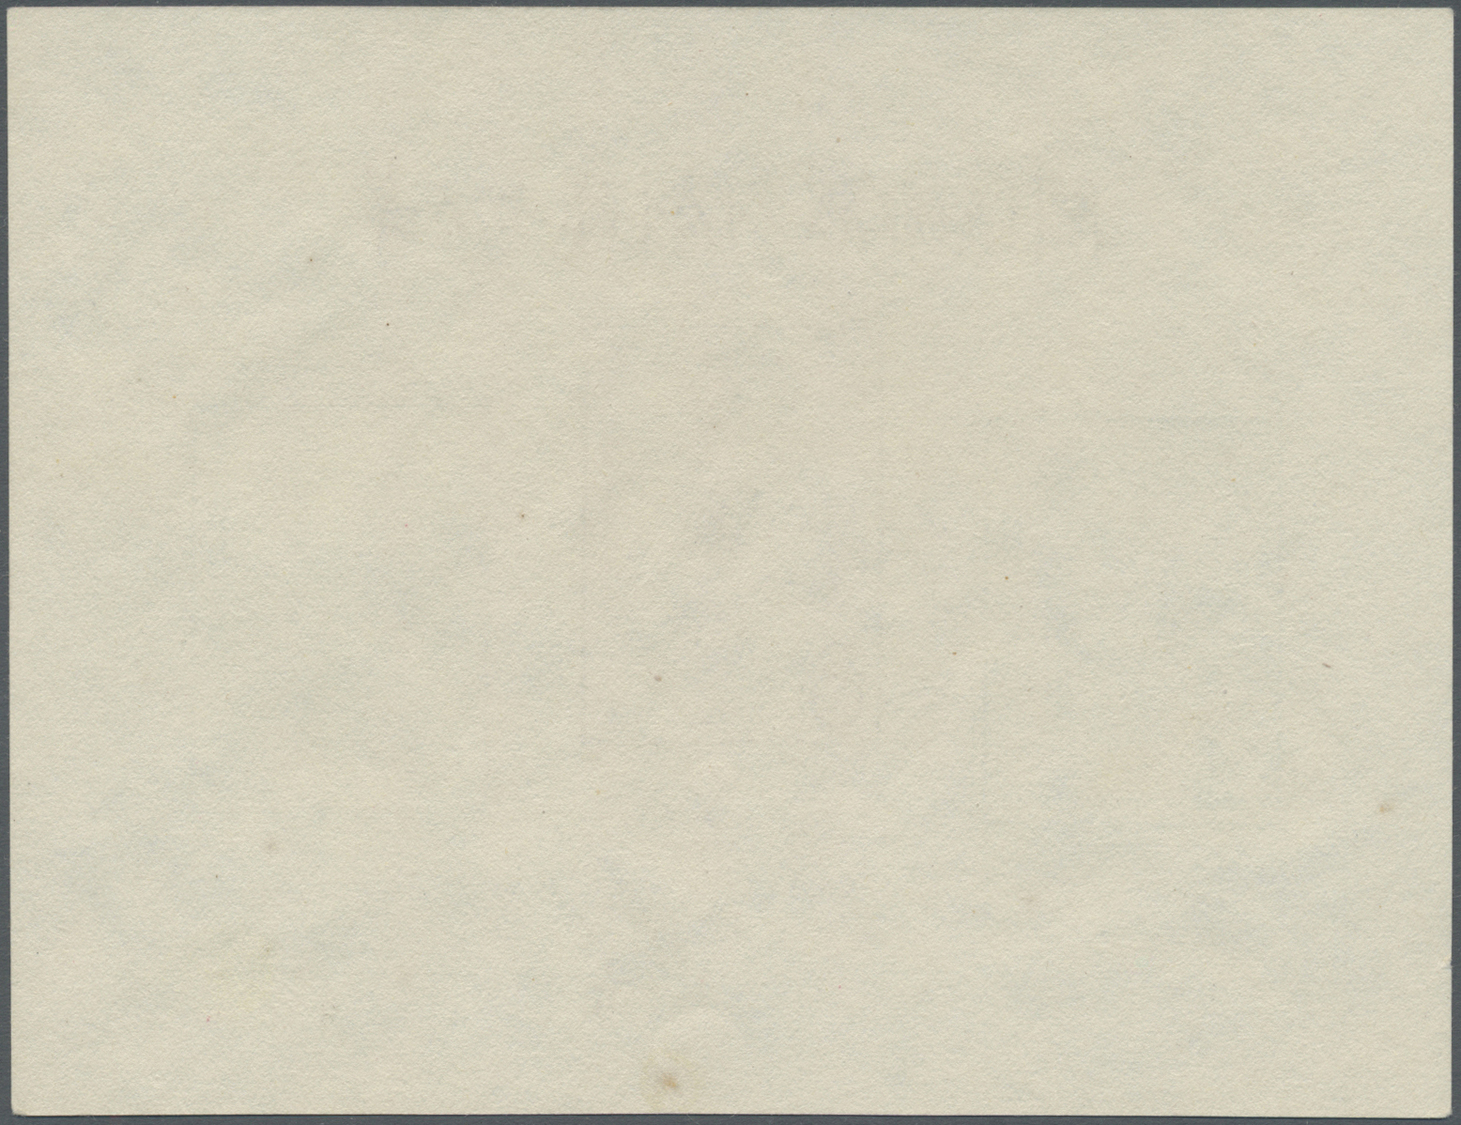 (*) China - Volksrepublik: 1955/56, Scientists S/s Resp. Poet Kuan S/s, Unused No Gum As Issued, Kuan With Two Tiny Brow - Autres & Non Classés